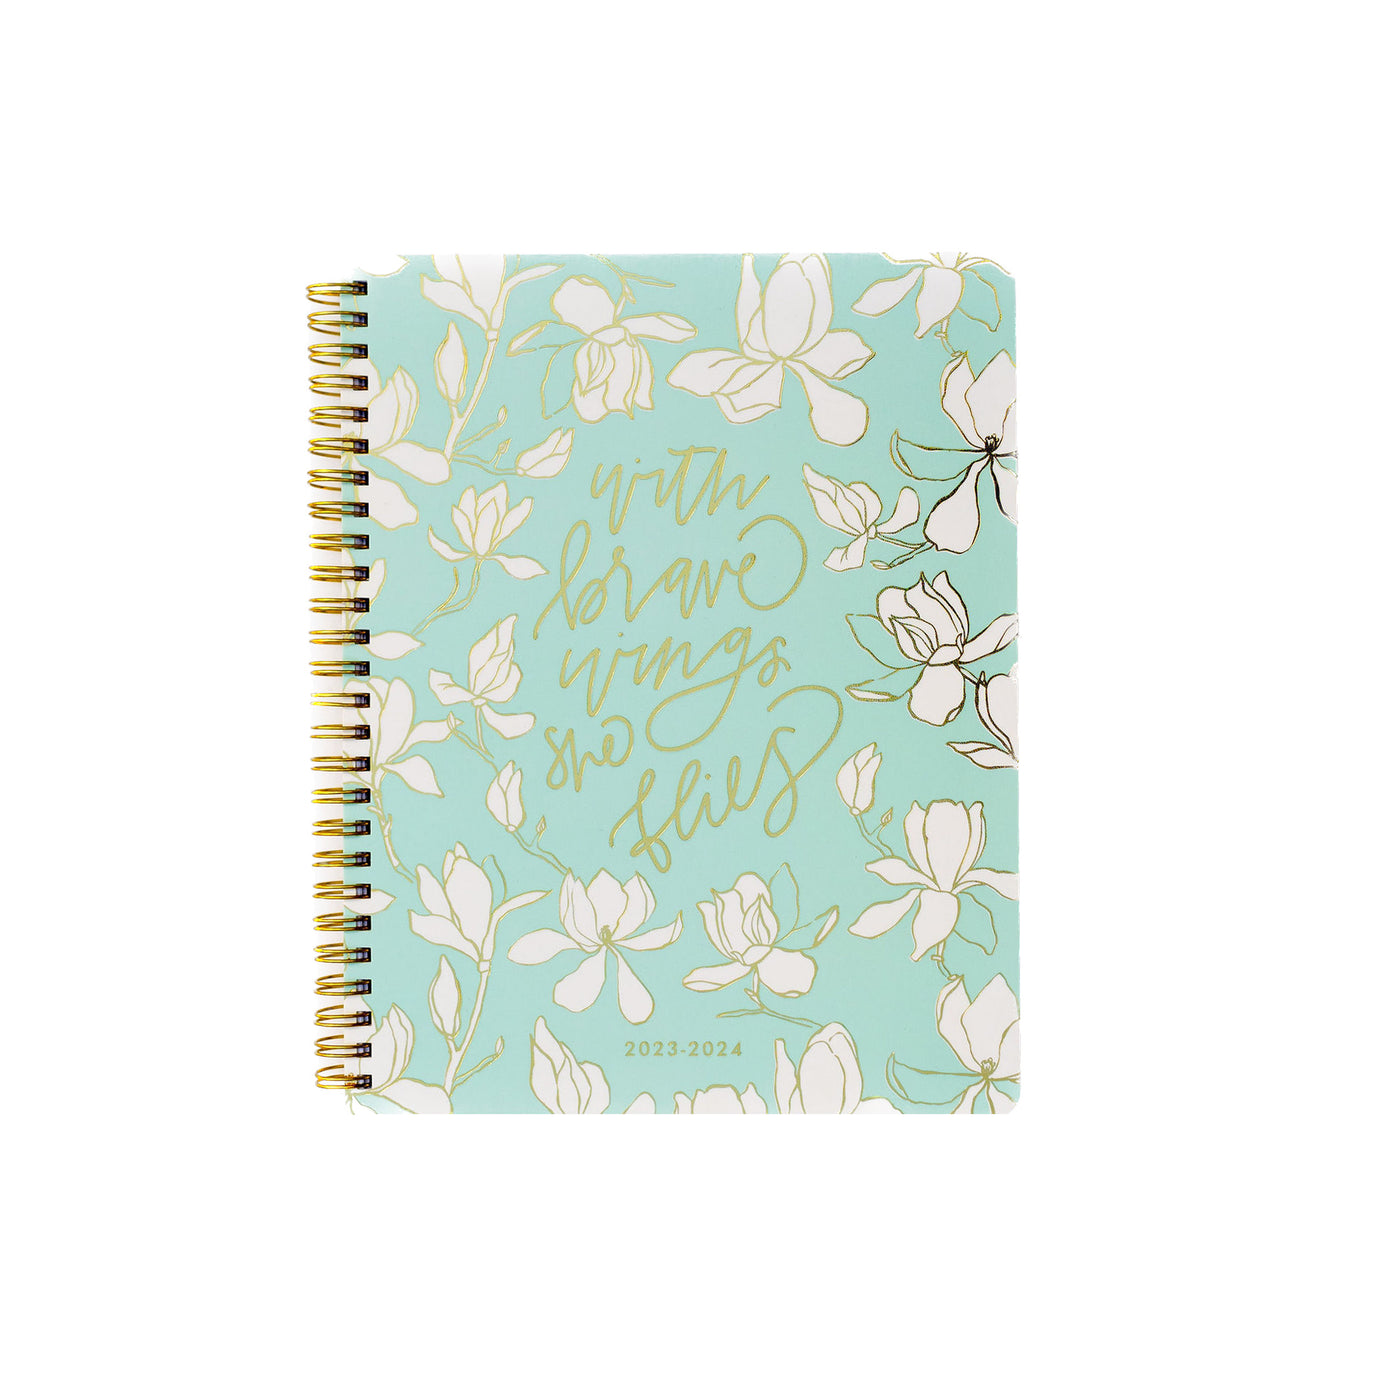 With Brave Wings | Academic Planner - Mary Square, LLC